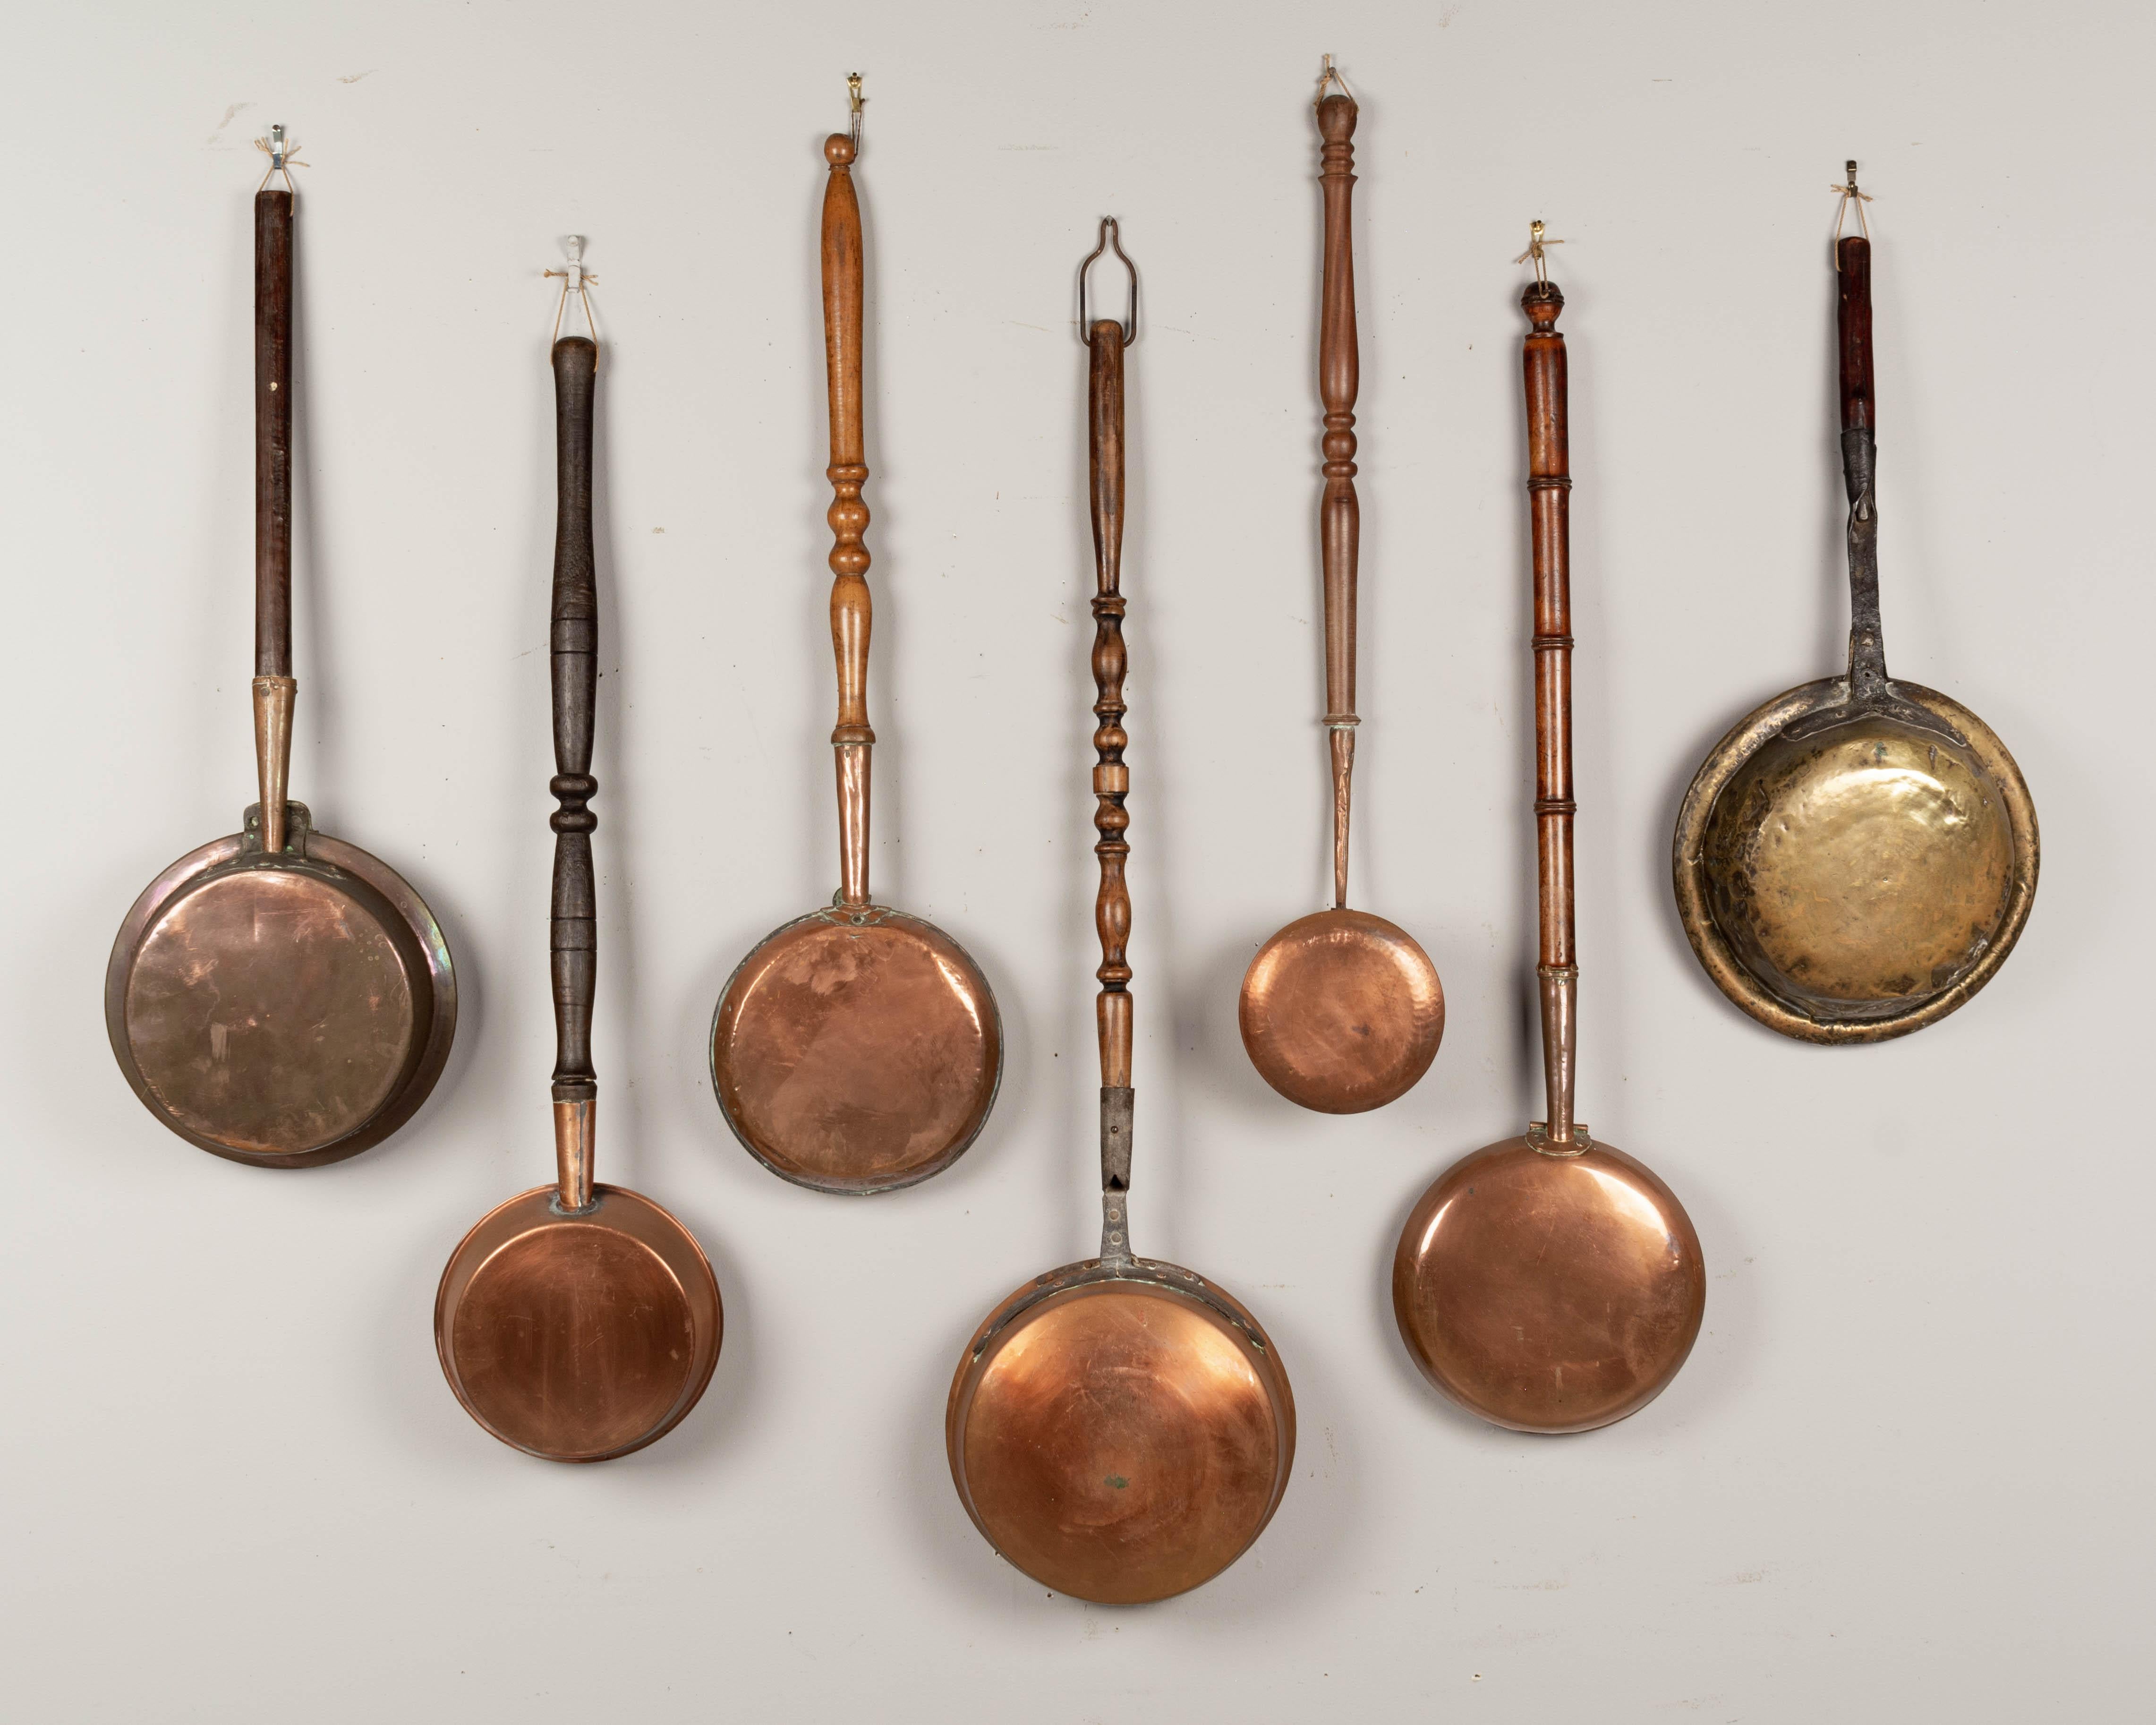 A collection of seven French bassinoires, or bed warmers, ranging in age from the 18th century to the early 1900s. Six are copper and one brass. All with hinged perforated lids and turned wood handles. The one on the right is from the 18th century